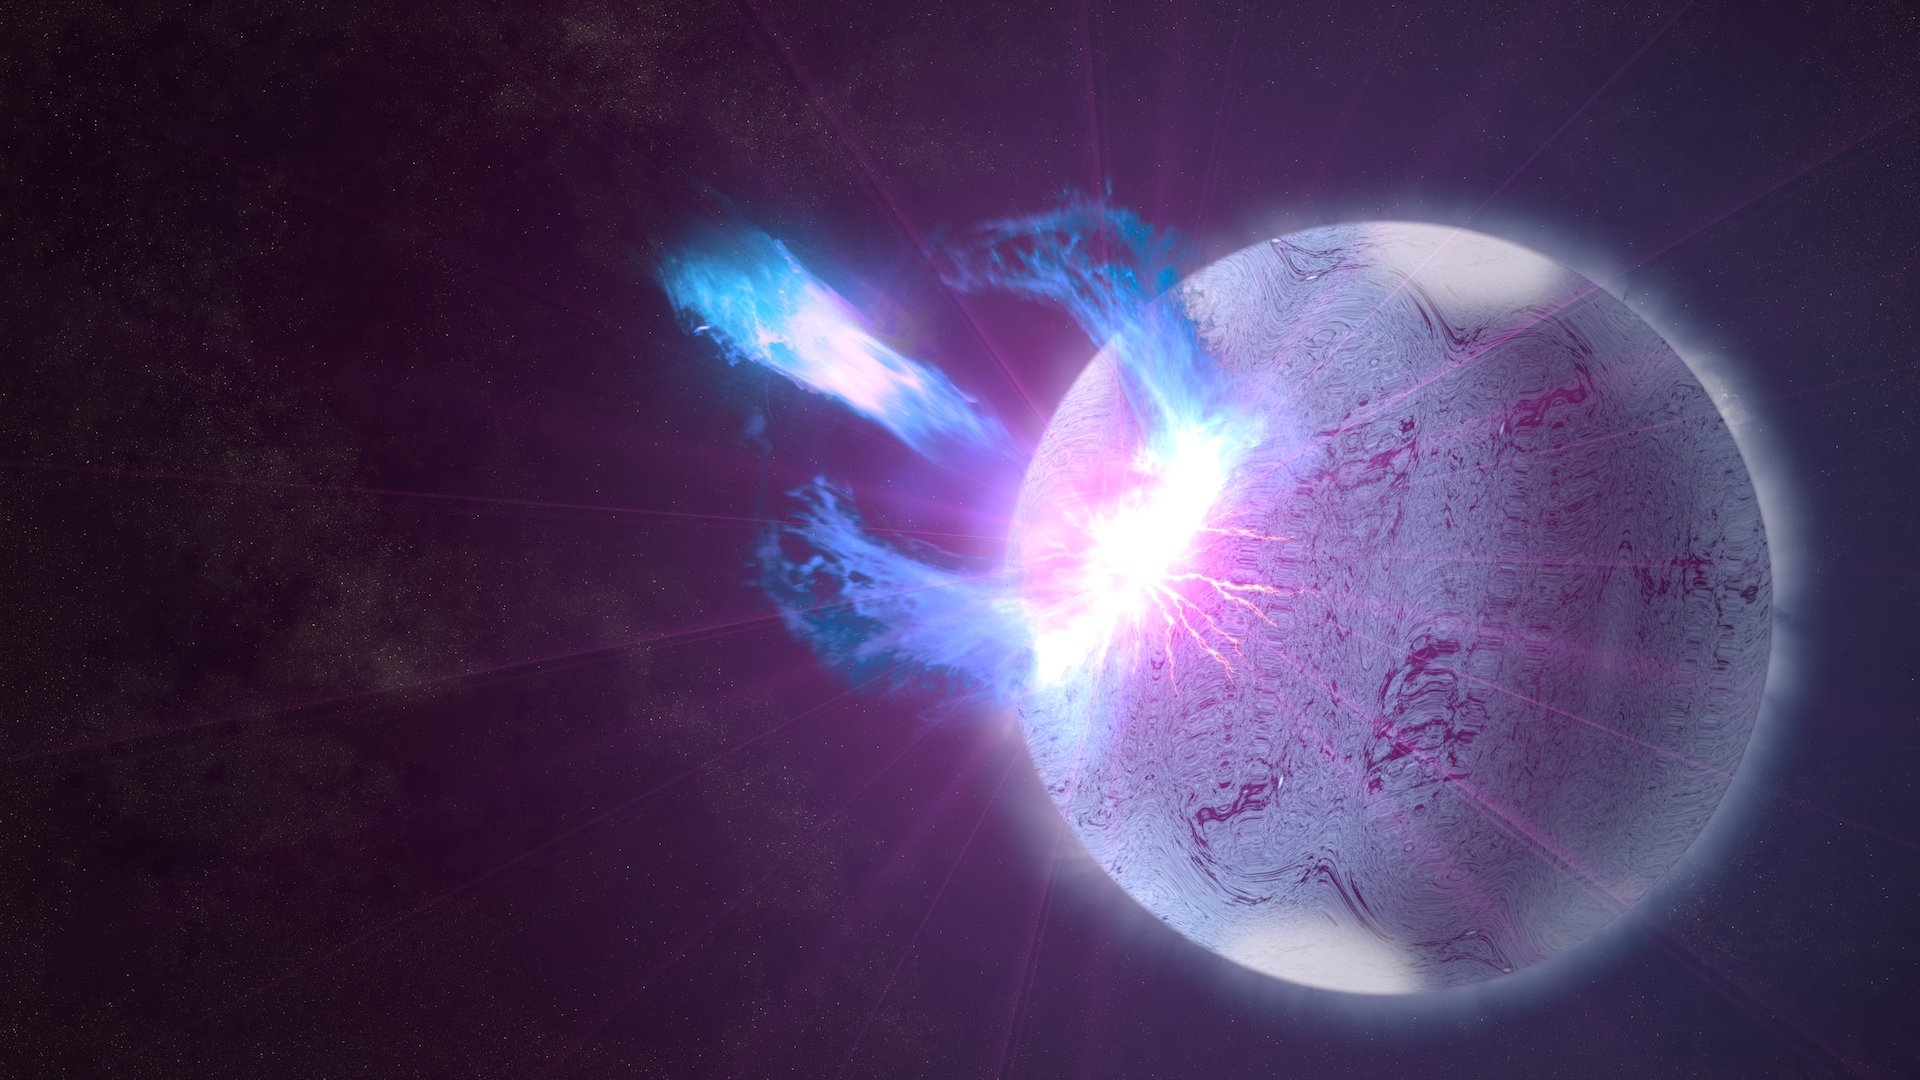 Preview Image for Fermi Finds Hints of Starquakes in Magnetar 'Storm'